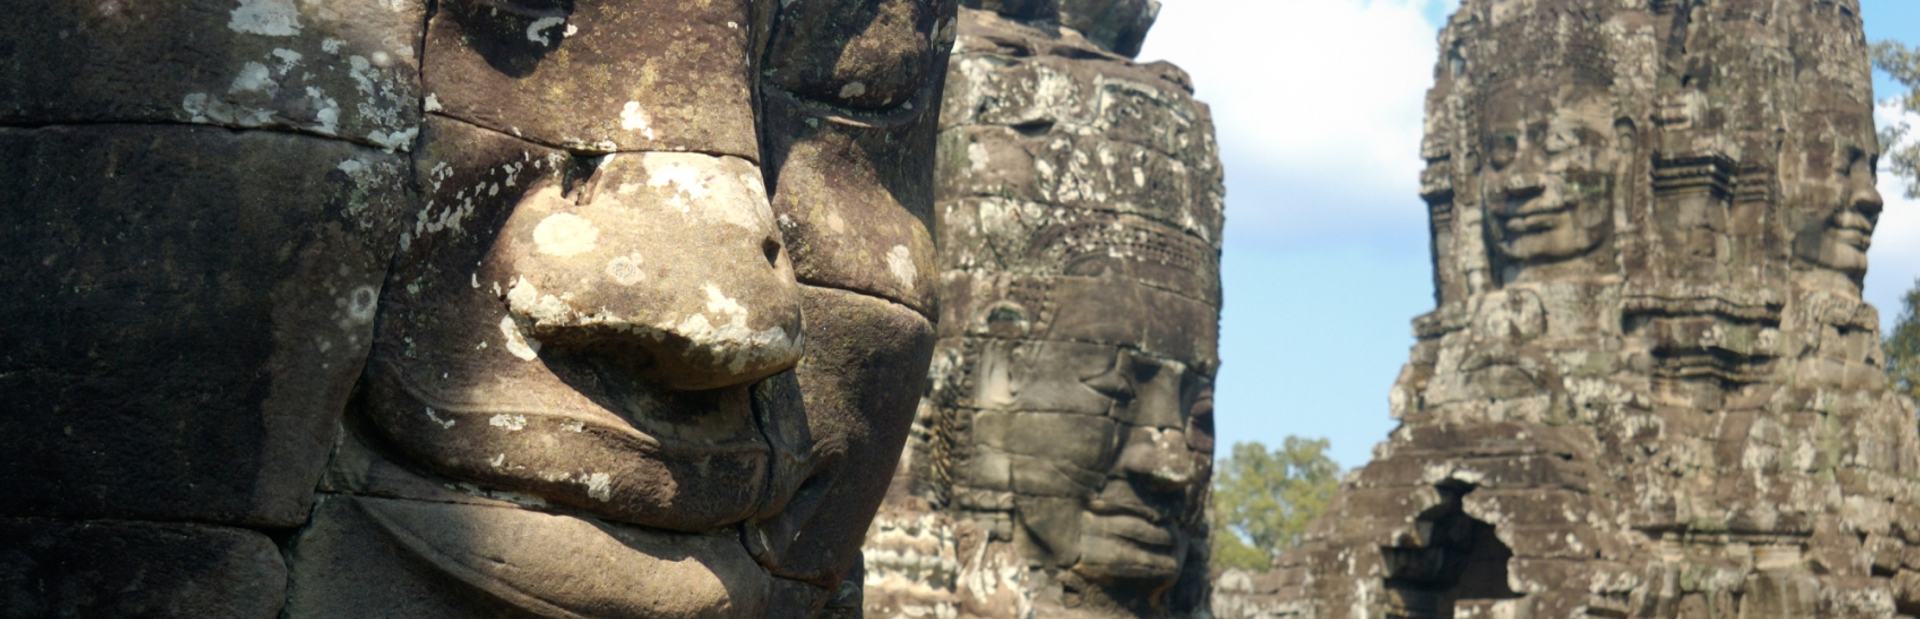 Sculptures of faces in the Temple of Bayon